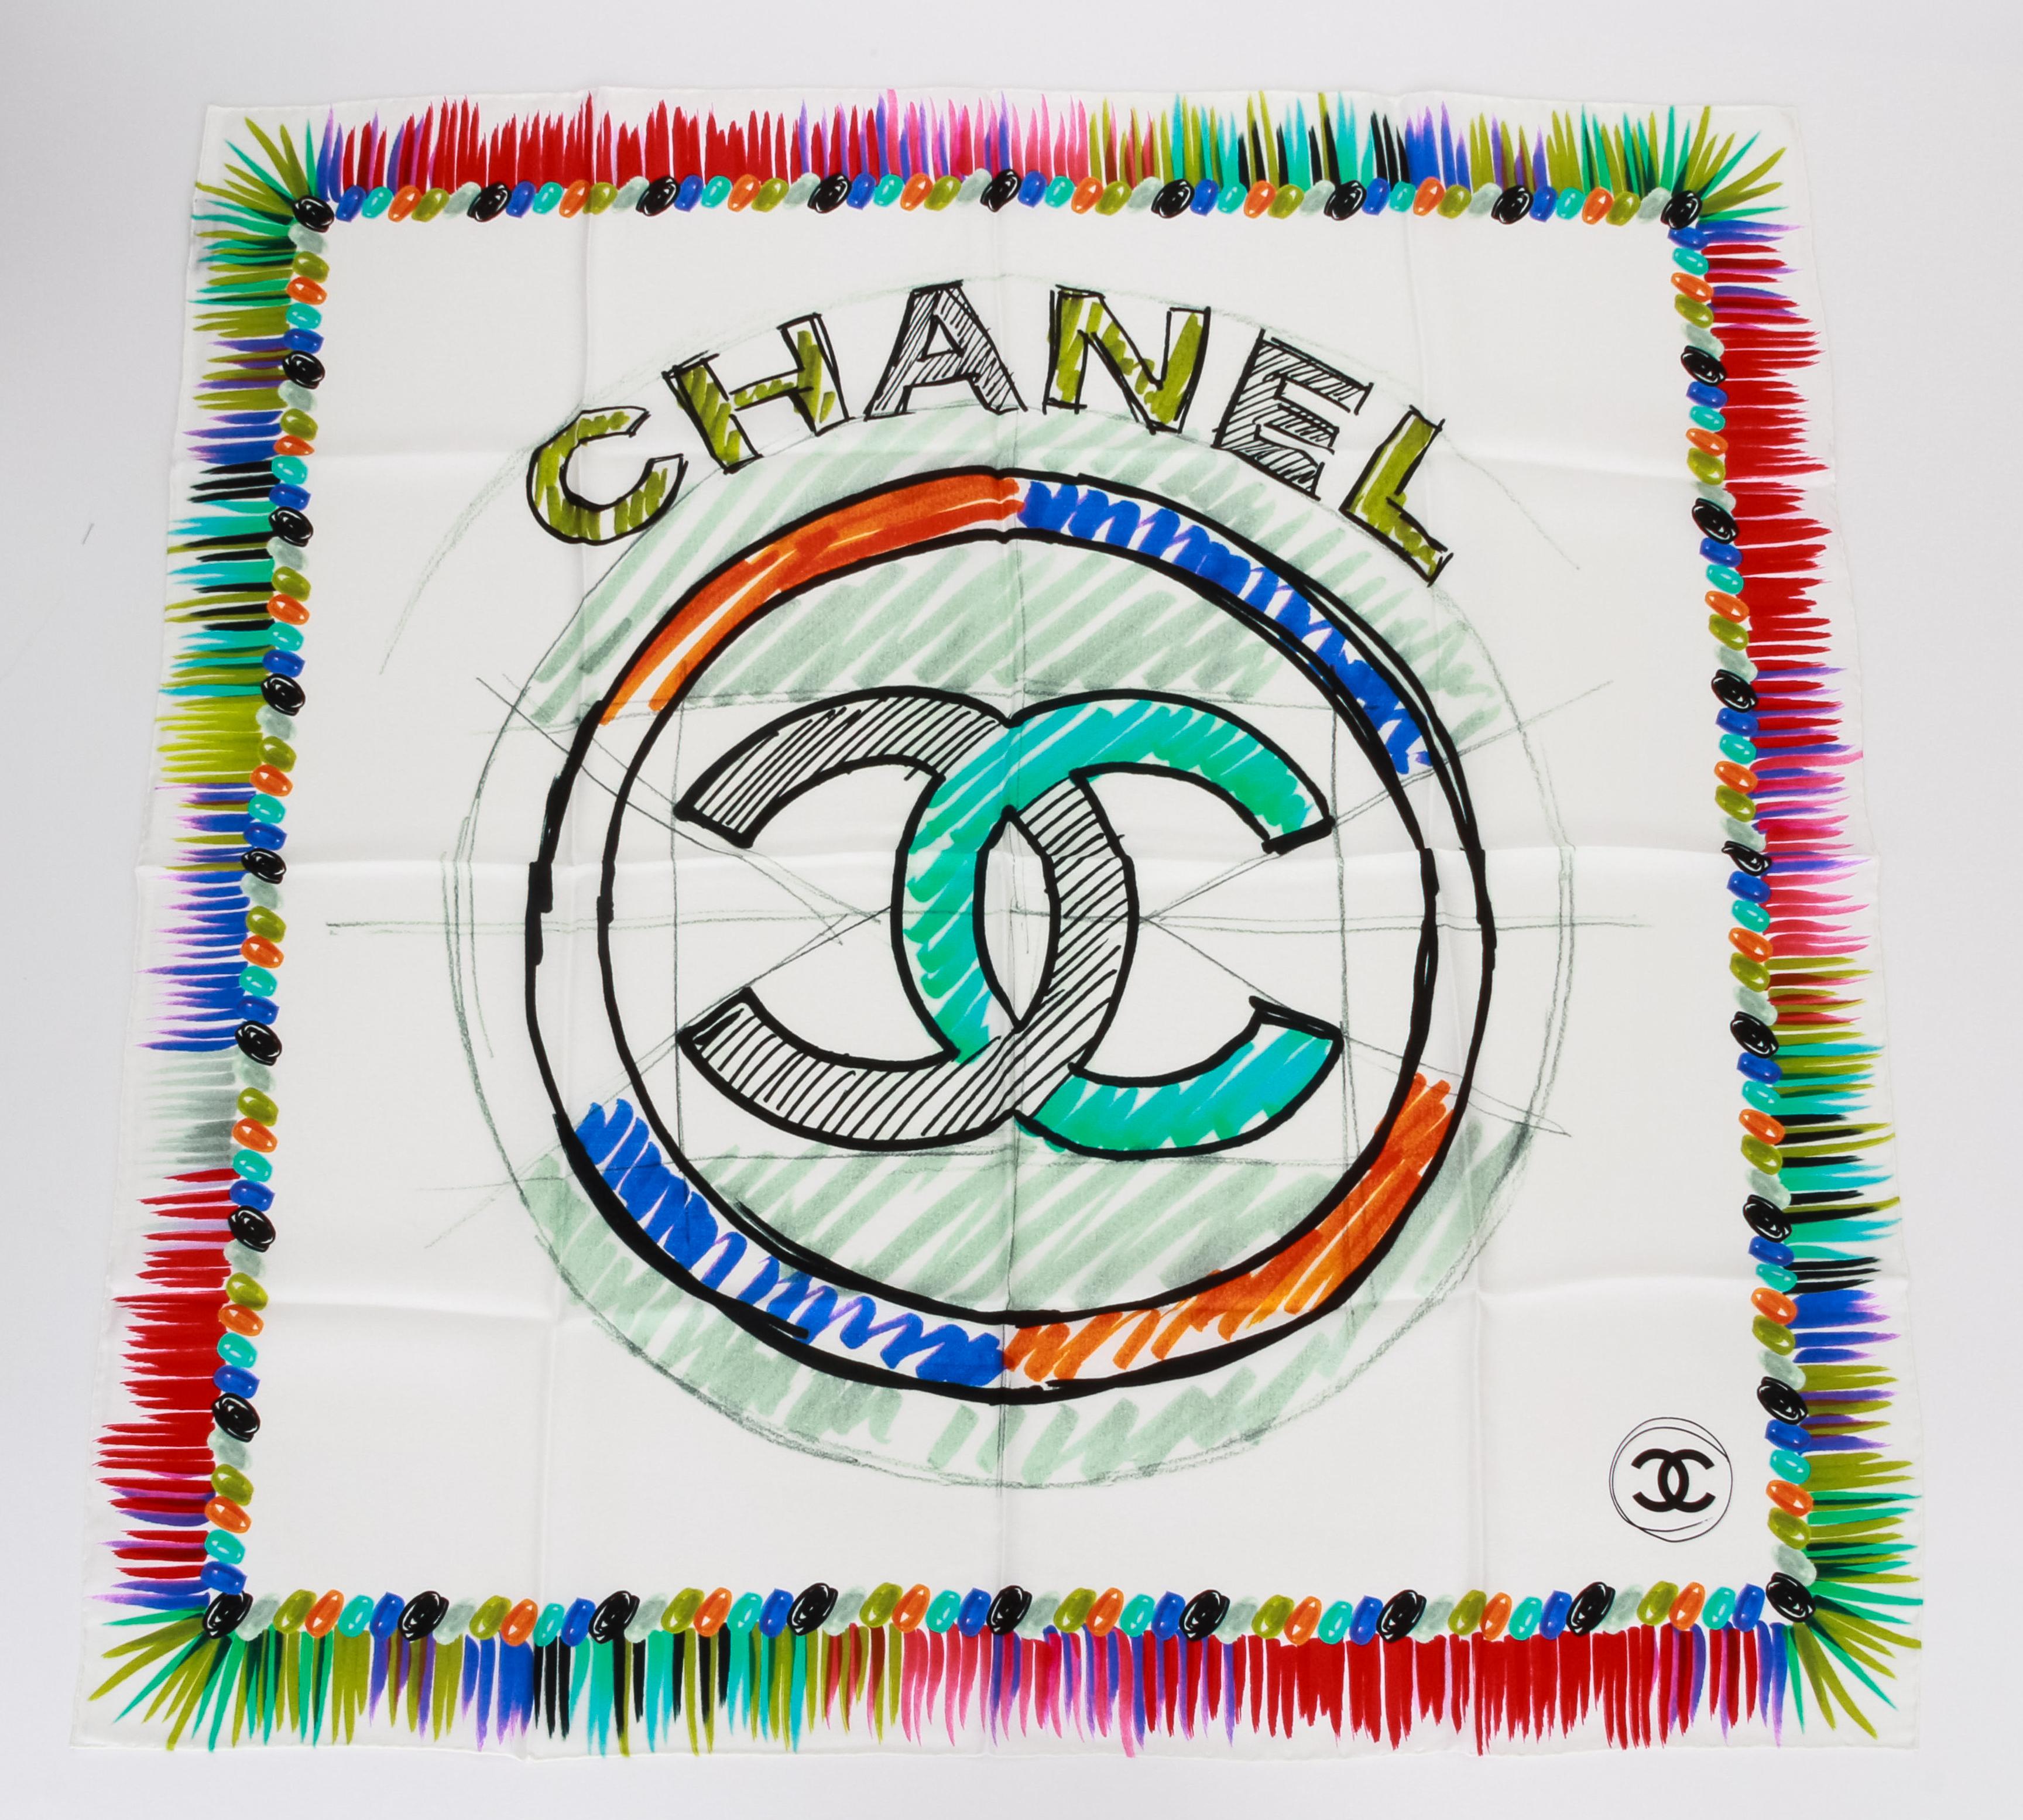 New Chanel white paint strokes scarf 
100% silk
35